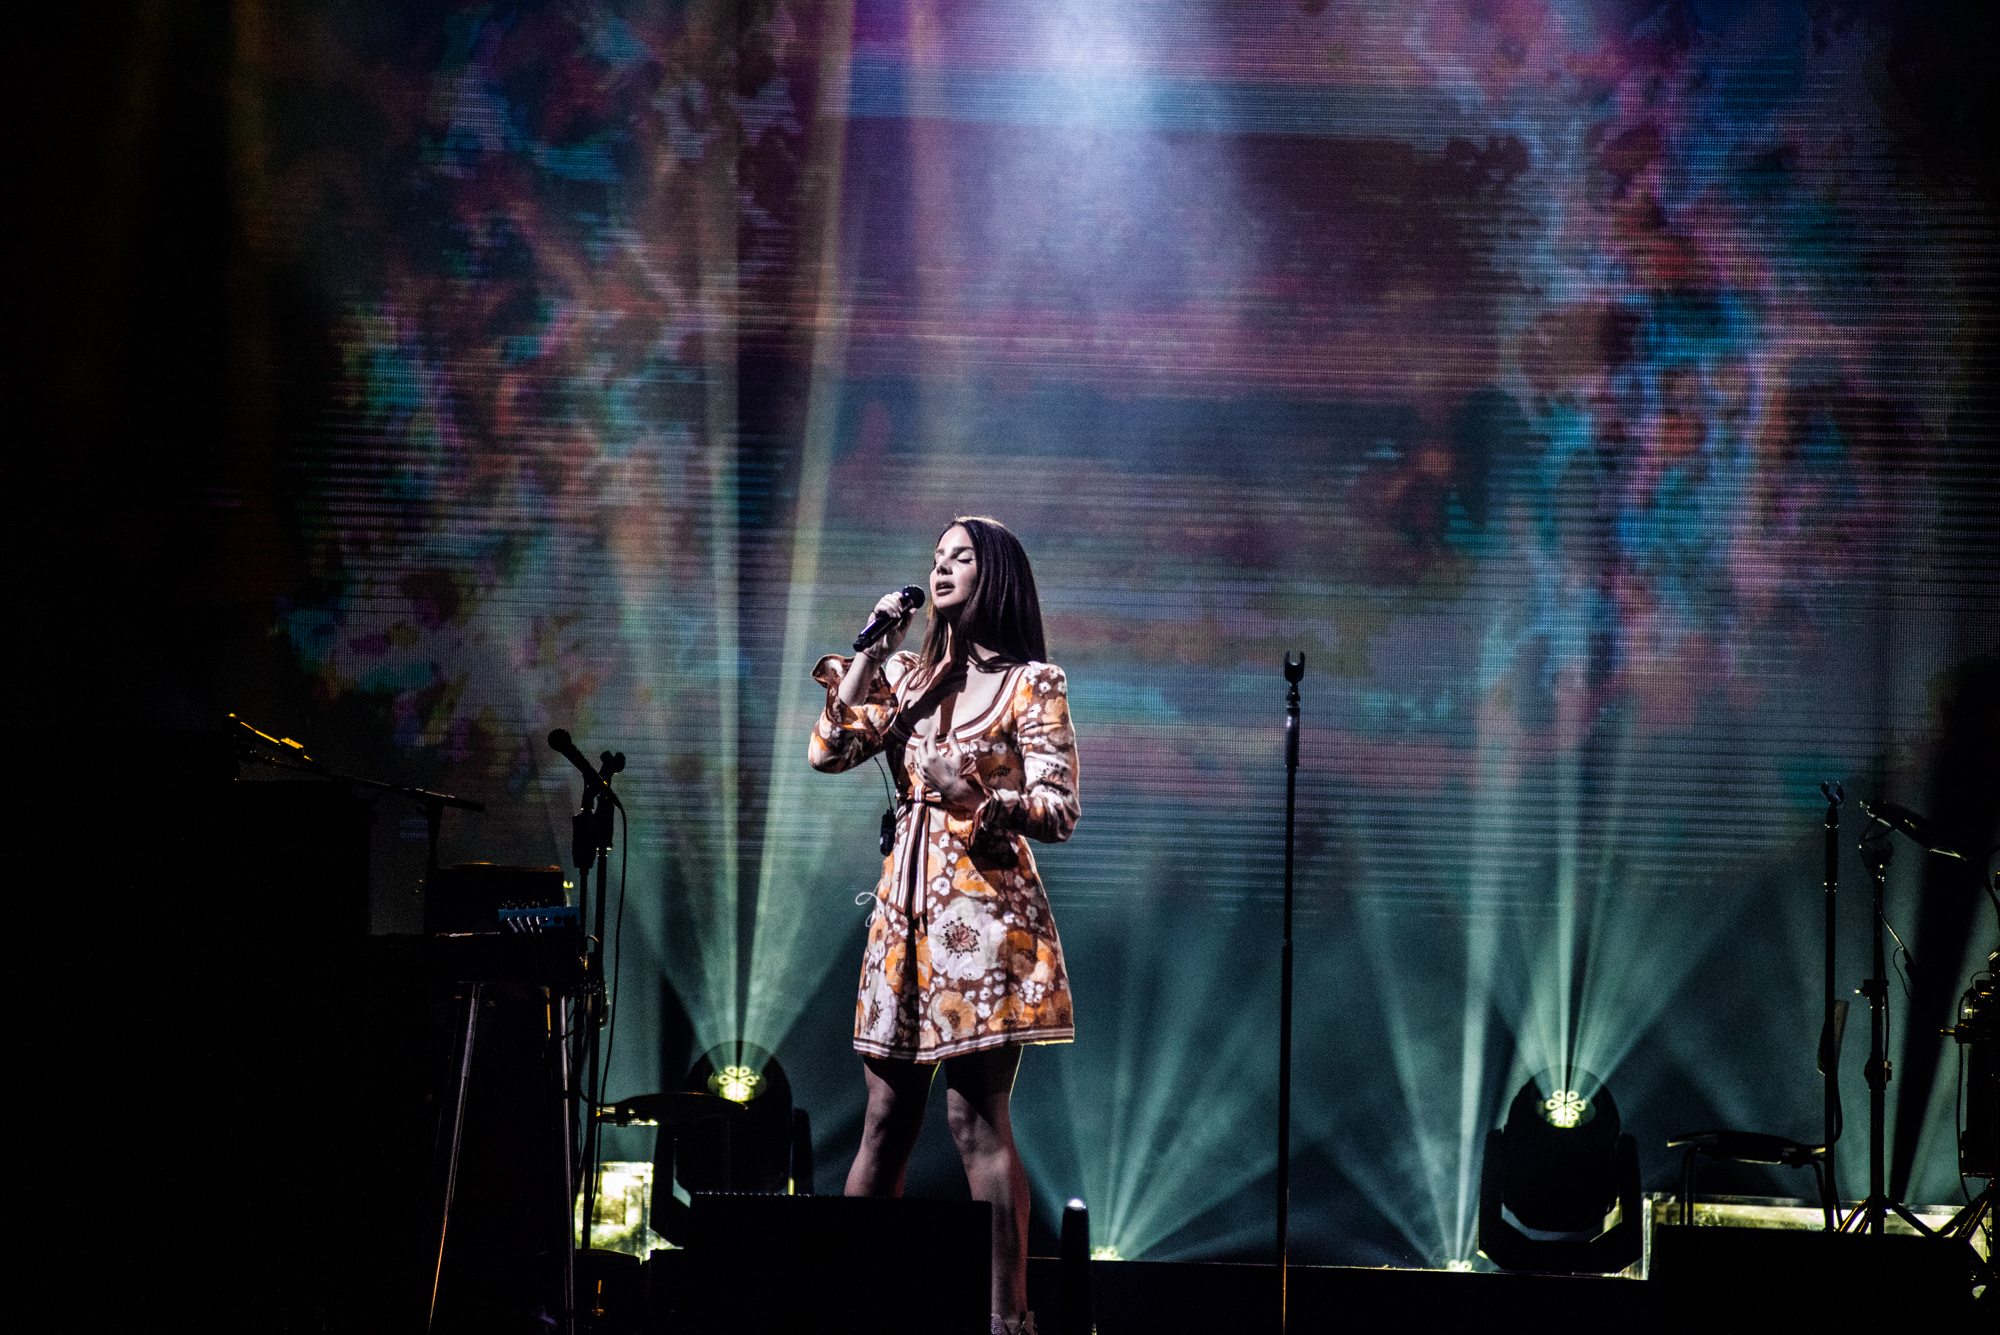 Lana singing Night Shift with Lucy Dacus in Chicago on November 8, 2019 :  r/lanadelrey